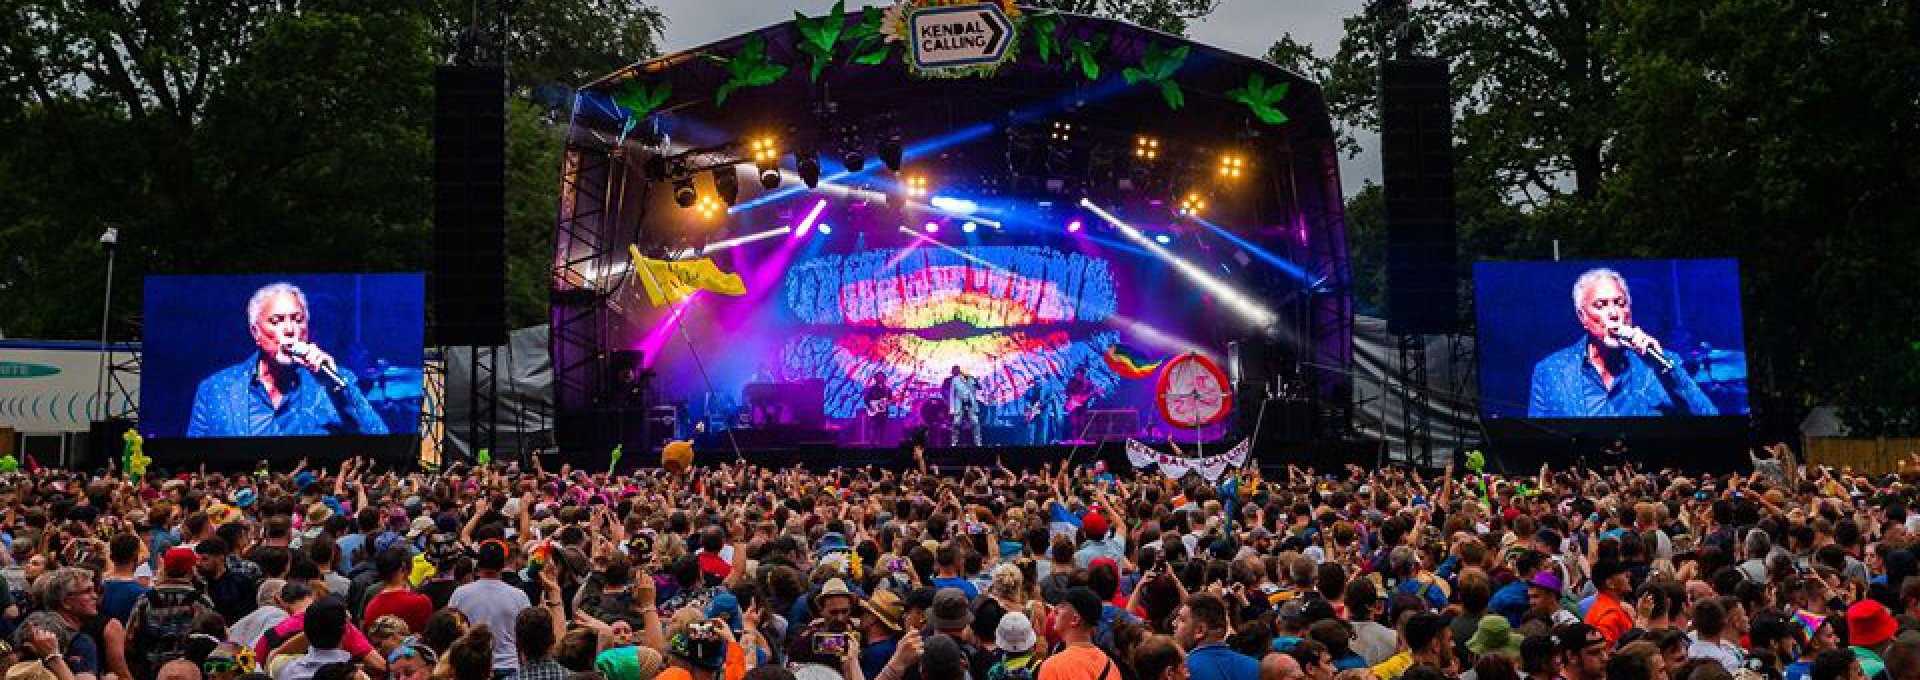 Kendal Calling 2020 Stage